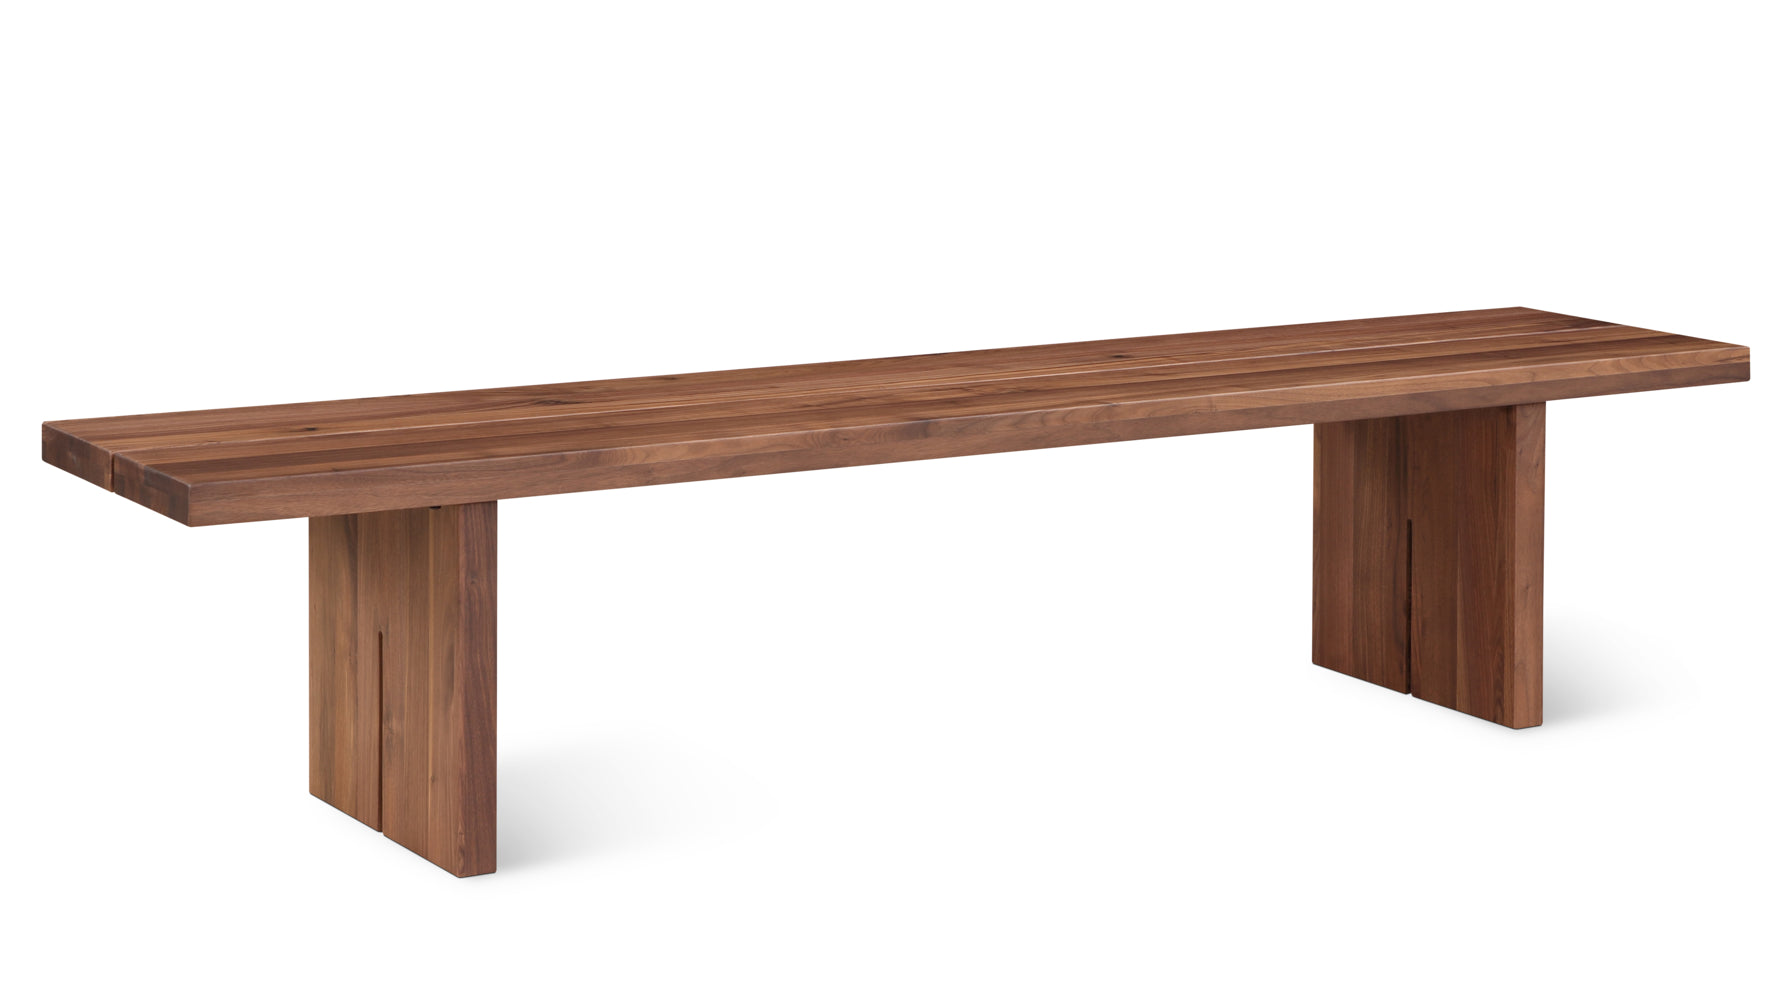 Plane Bench For 4,American Walnut - Image 1